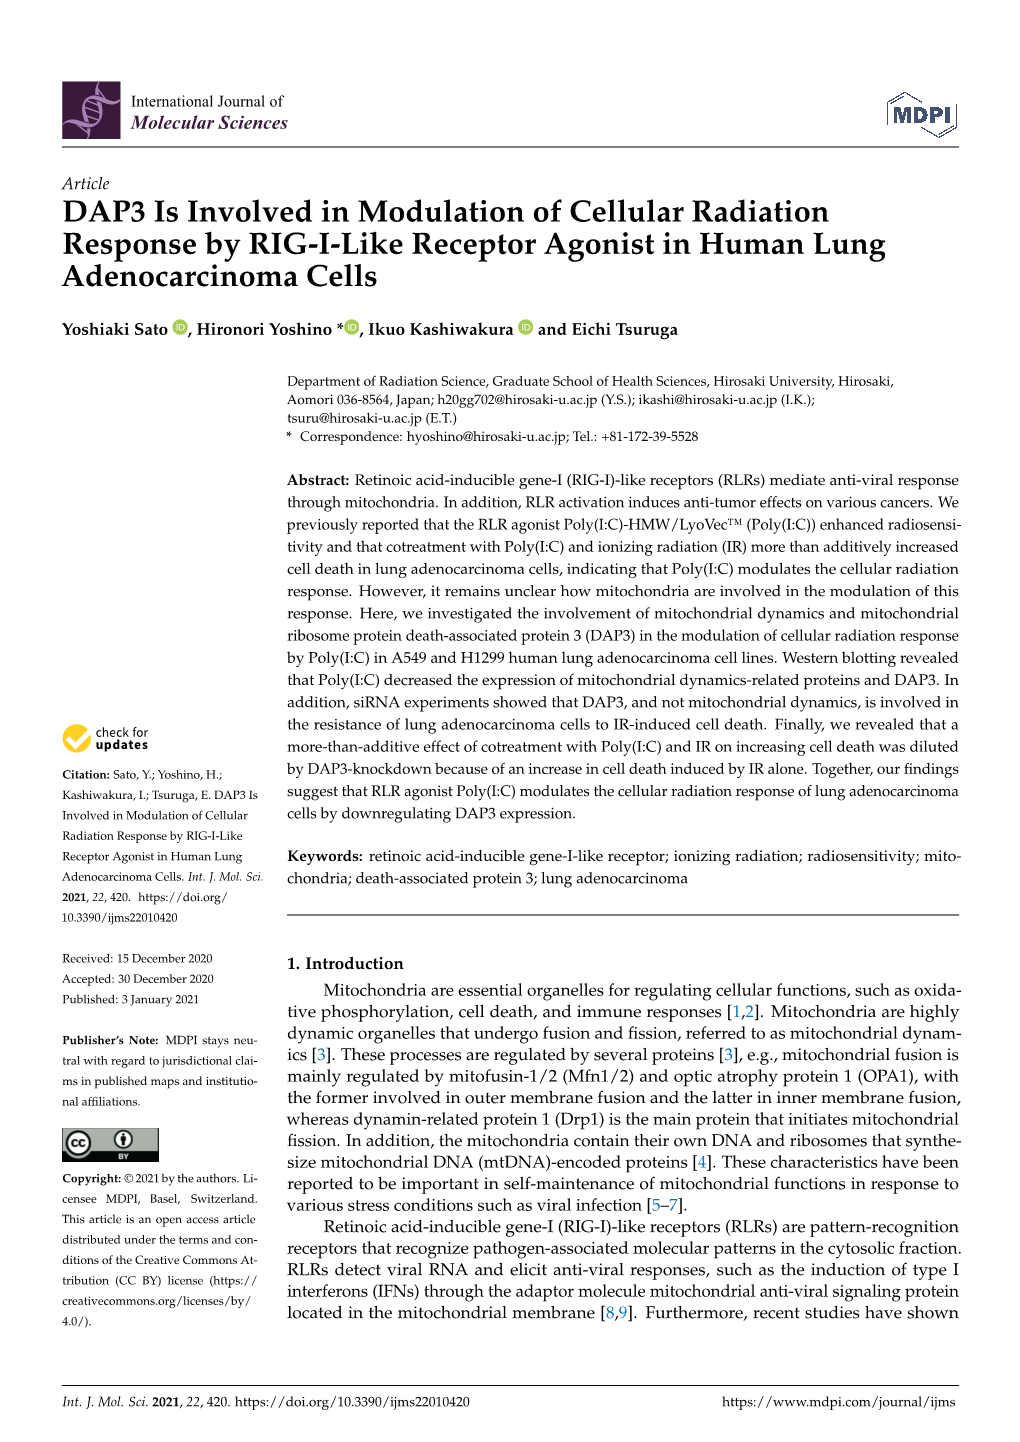 DAP3 Is Involved in Modulation of Cellular Radiation Response by RIG-I-Like Receptor Agonist in Human Lung Adenocarcinoma Cells